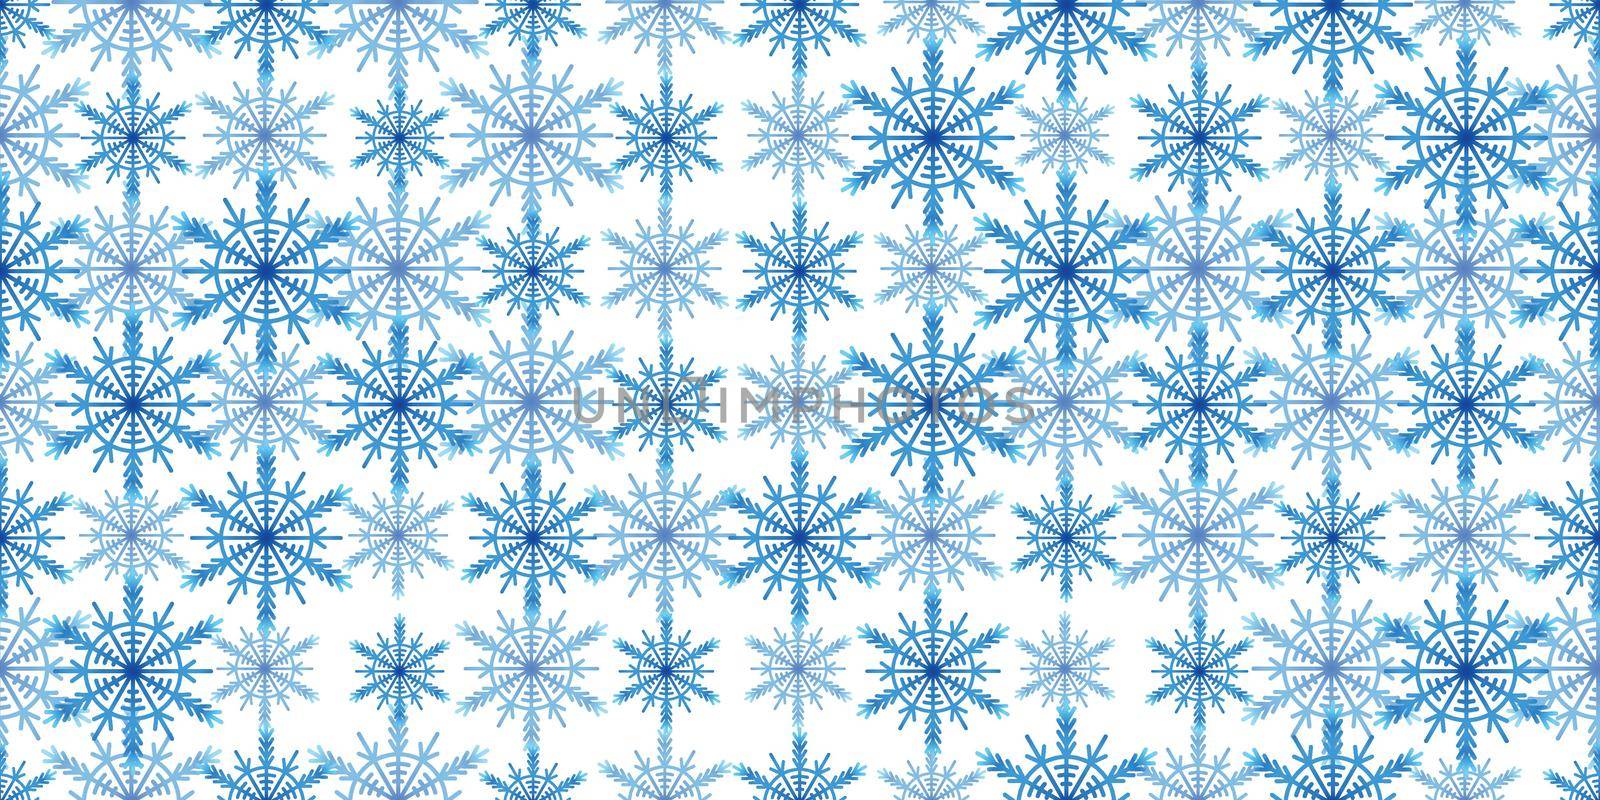 Winter seamless pattern with blue snowflakes on white background. Vector illustration for fabric, textile wallpaper, posters, gift wrapping paper. Christmas vector illustration. Falling snow by allaku